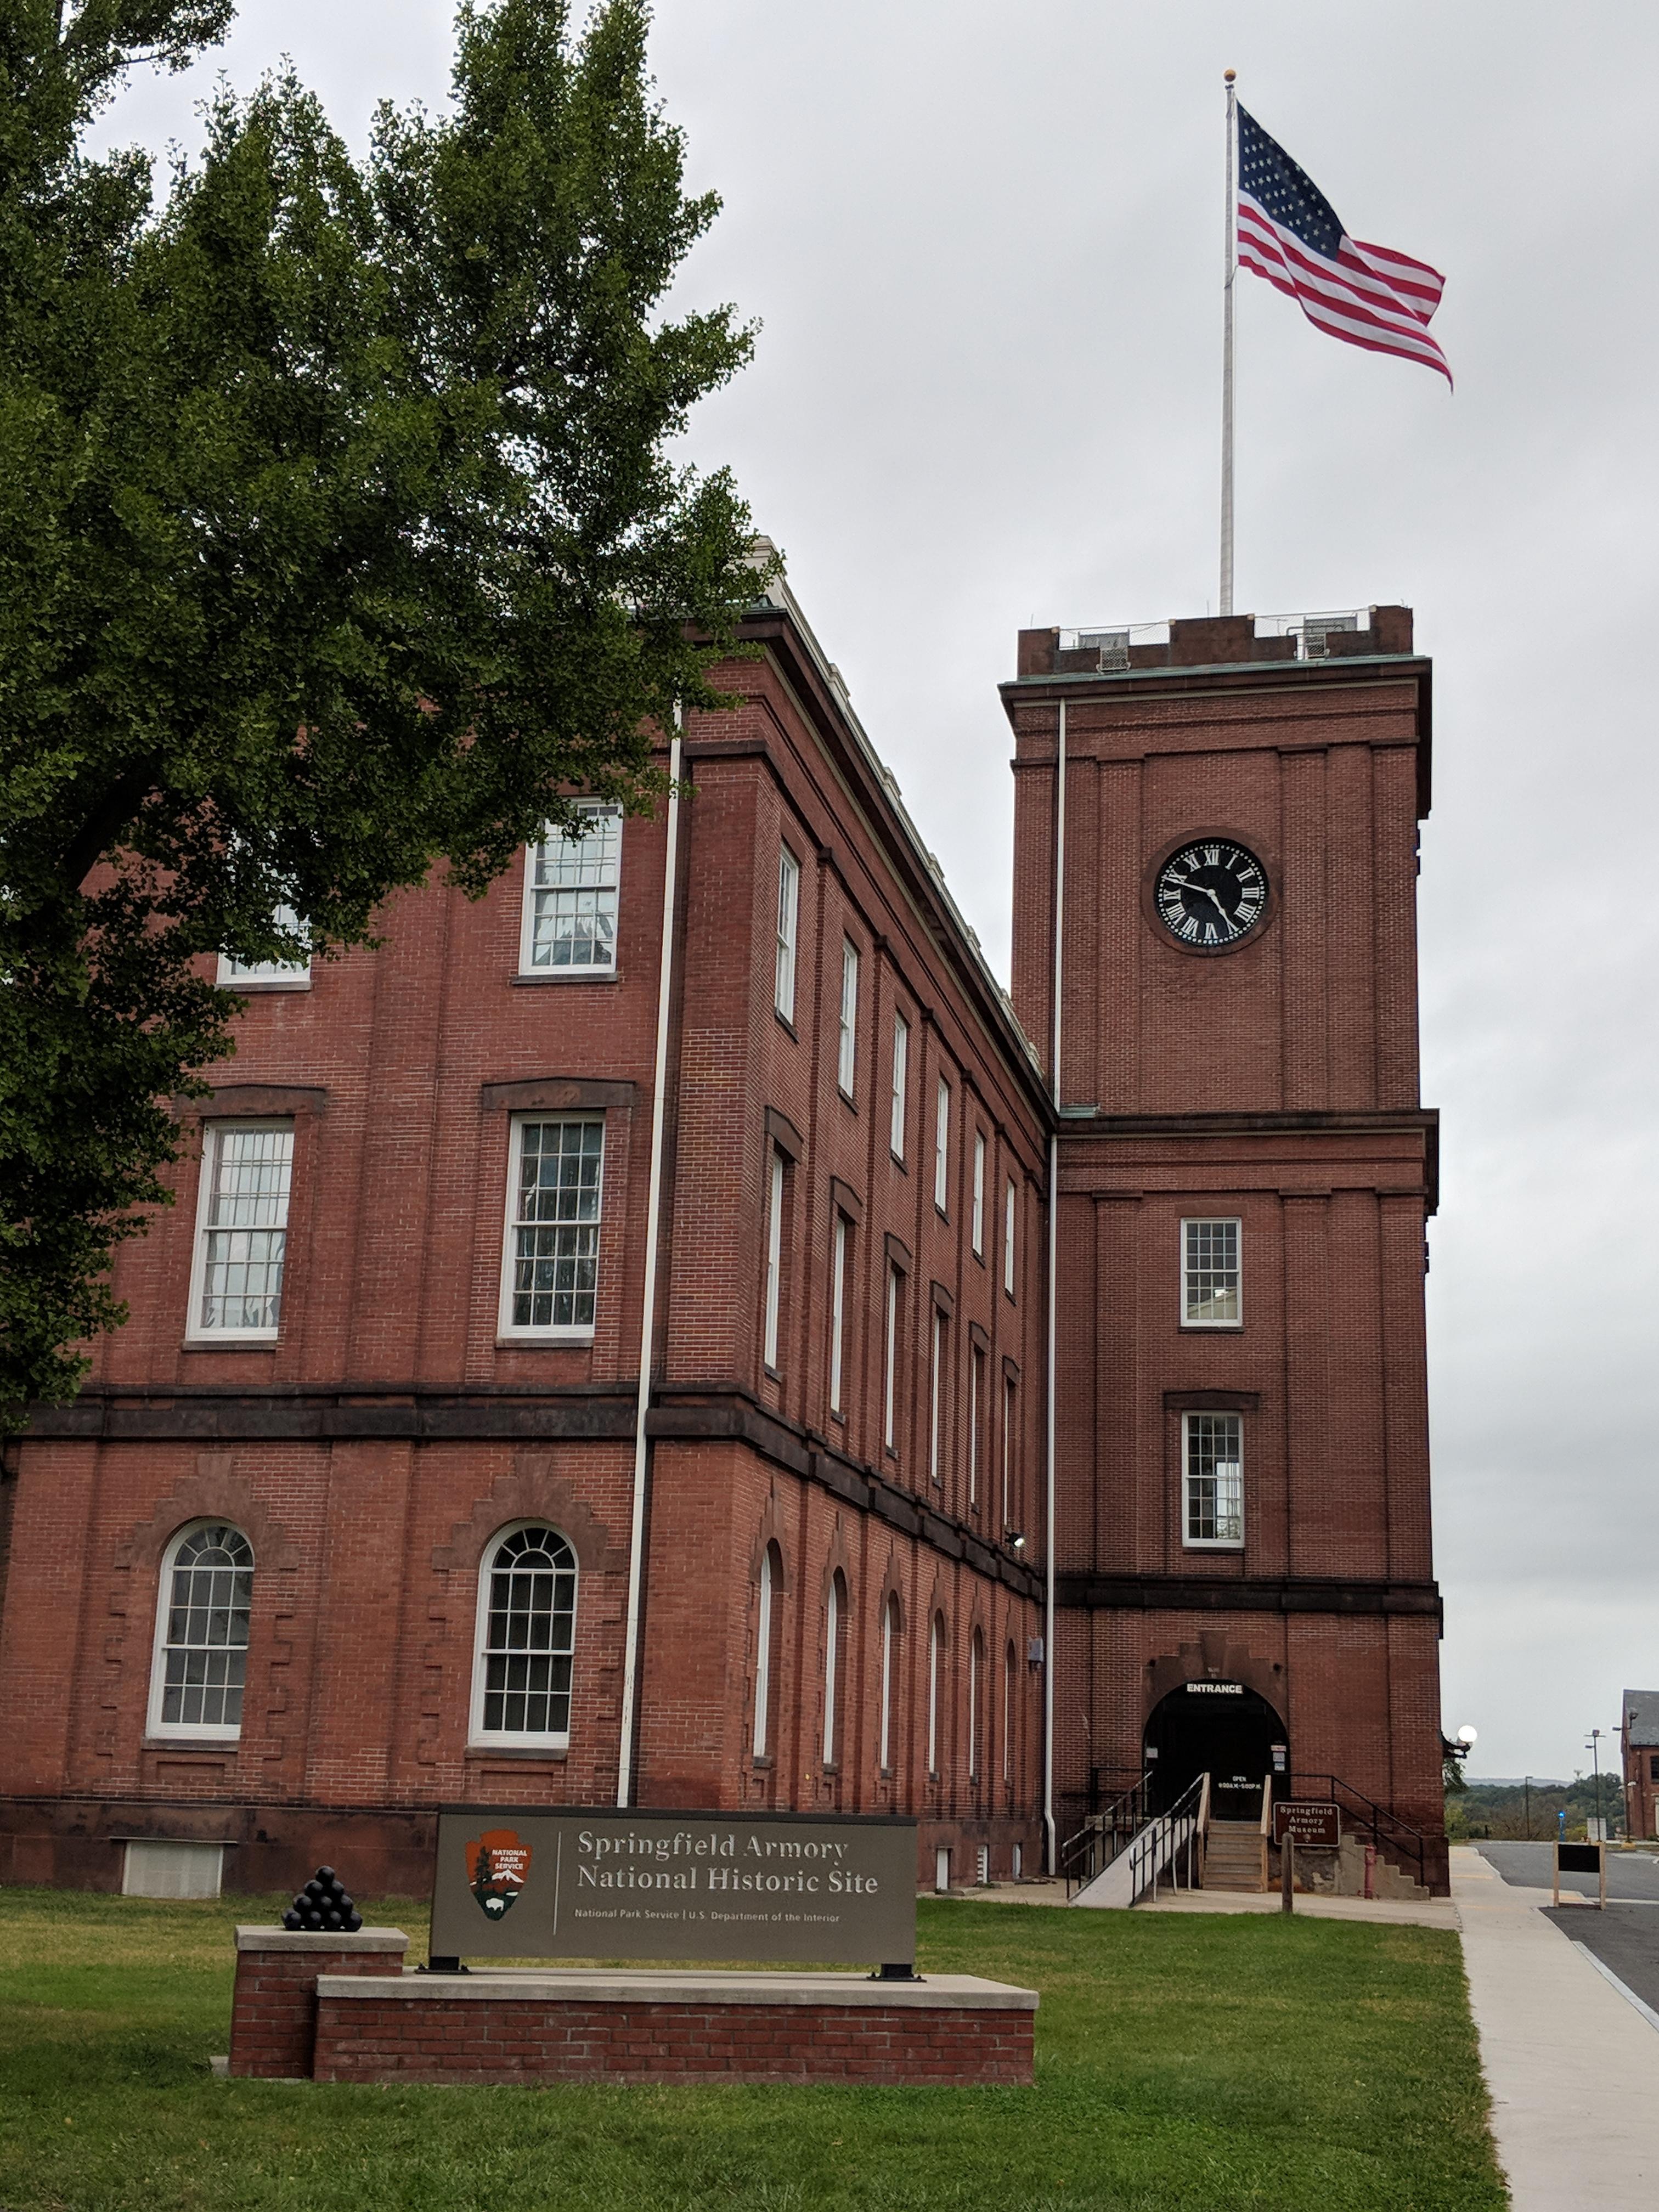 The tower of the Armory with the flag at full mast blowing in the wind on a cloudy day.